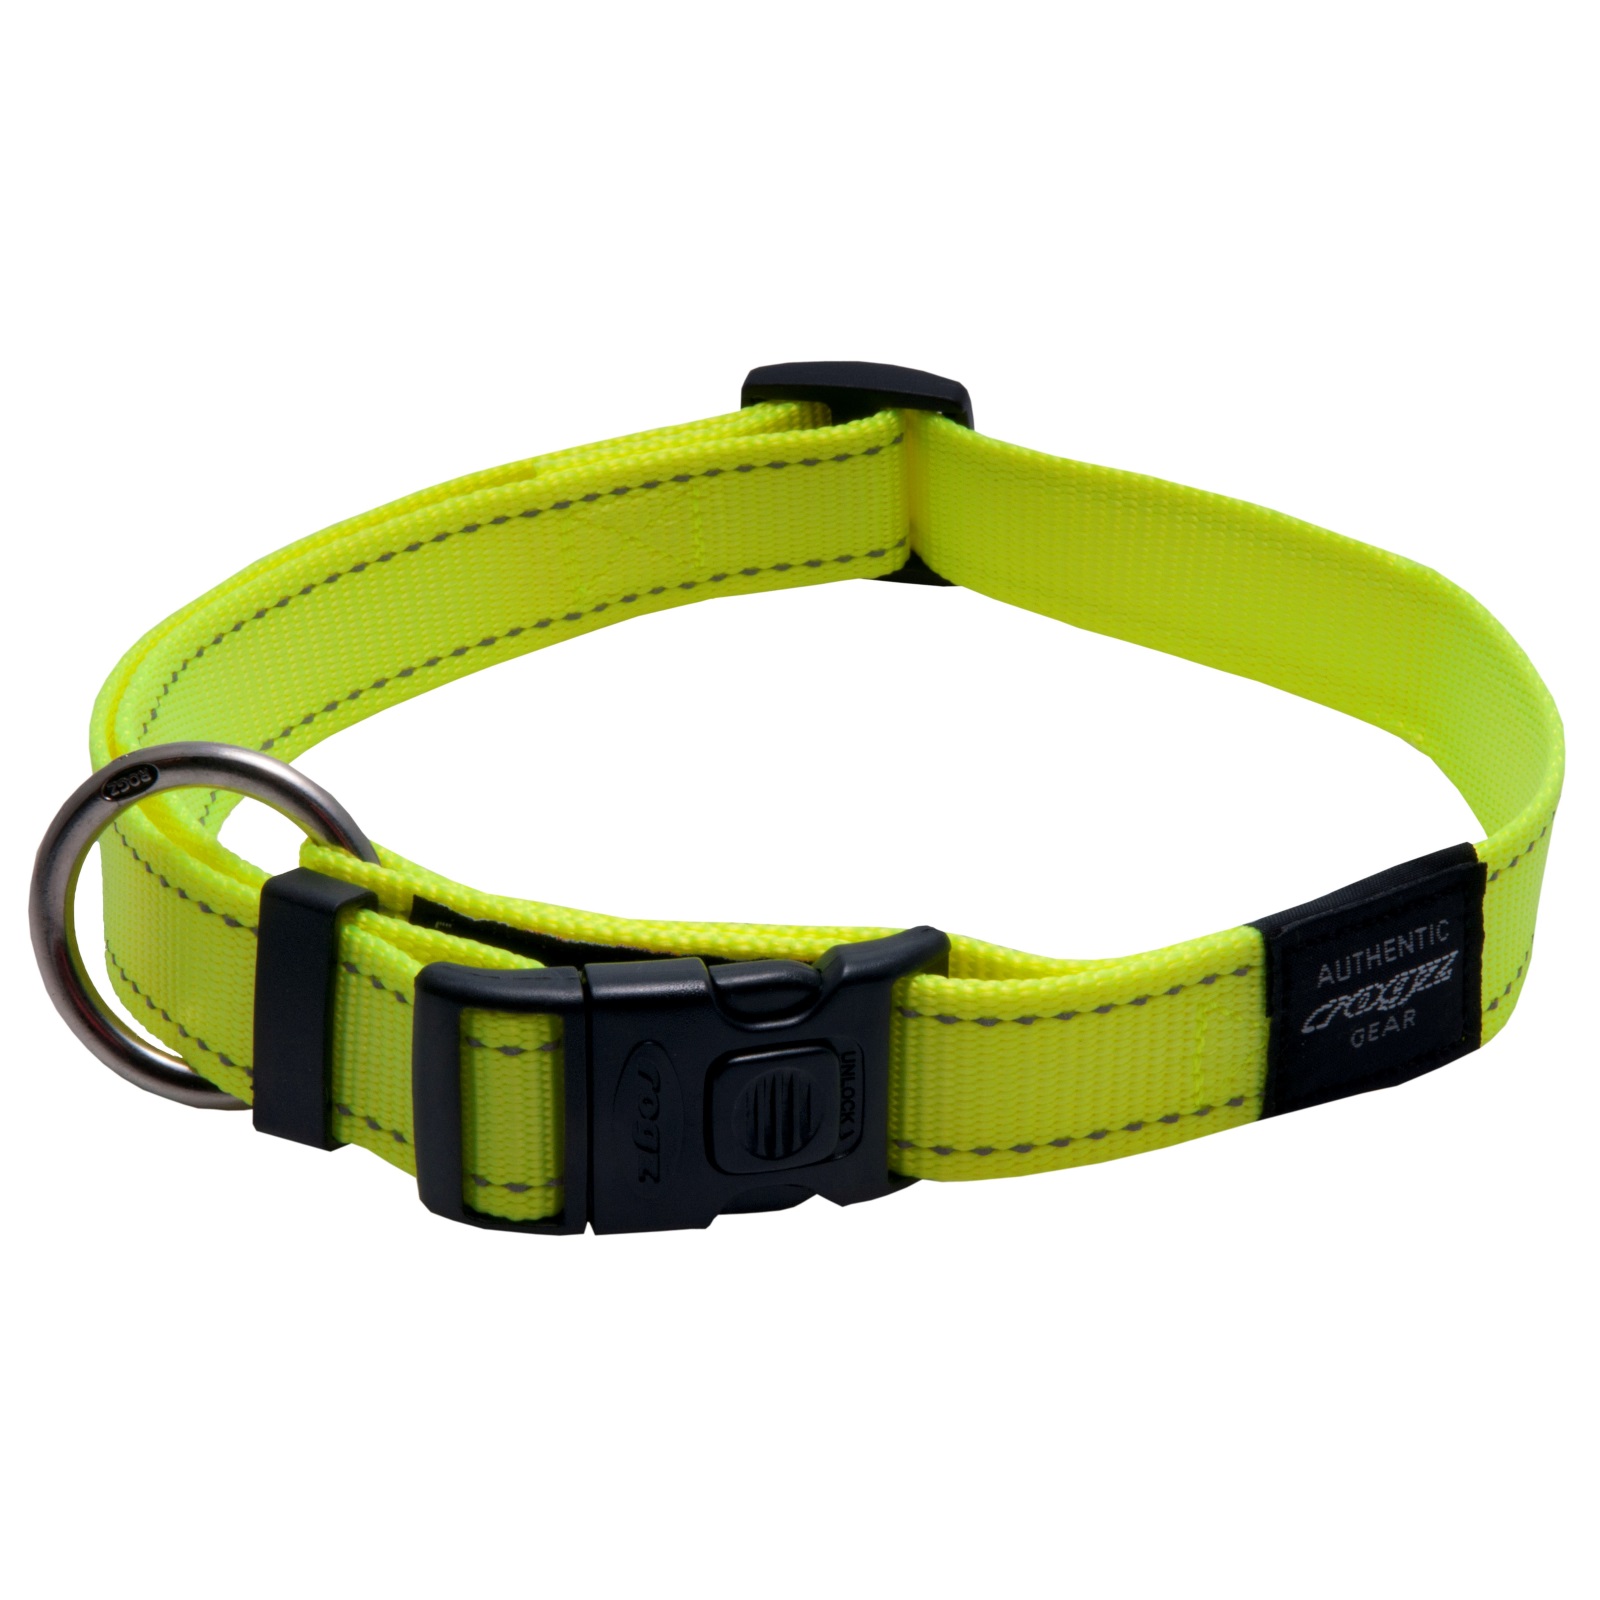 Rogz Utility Side-Release Collar with Reflective Stitching - Dayglow Yellow image 2